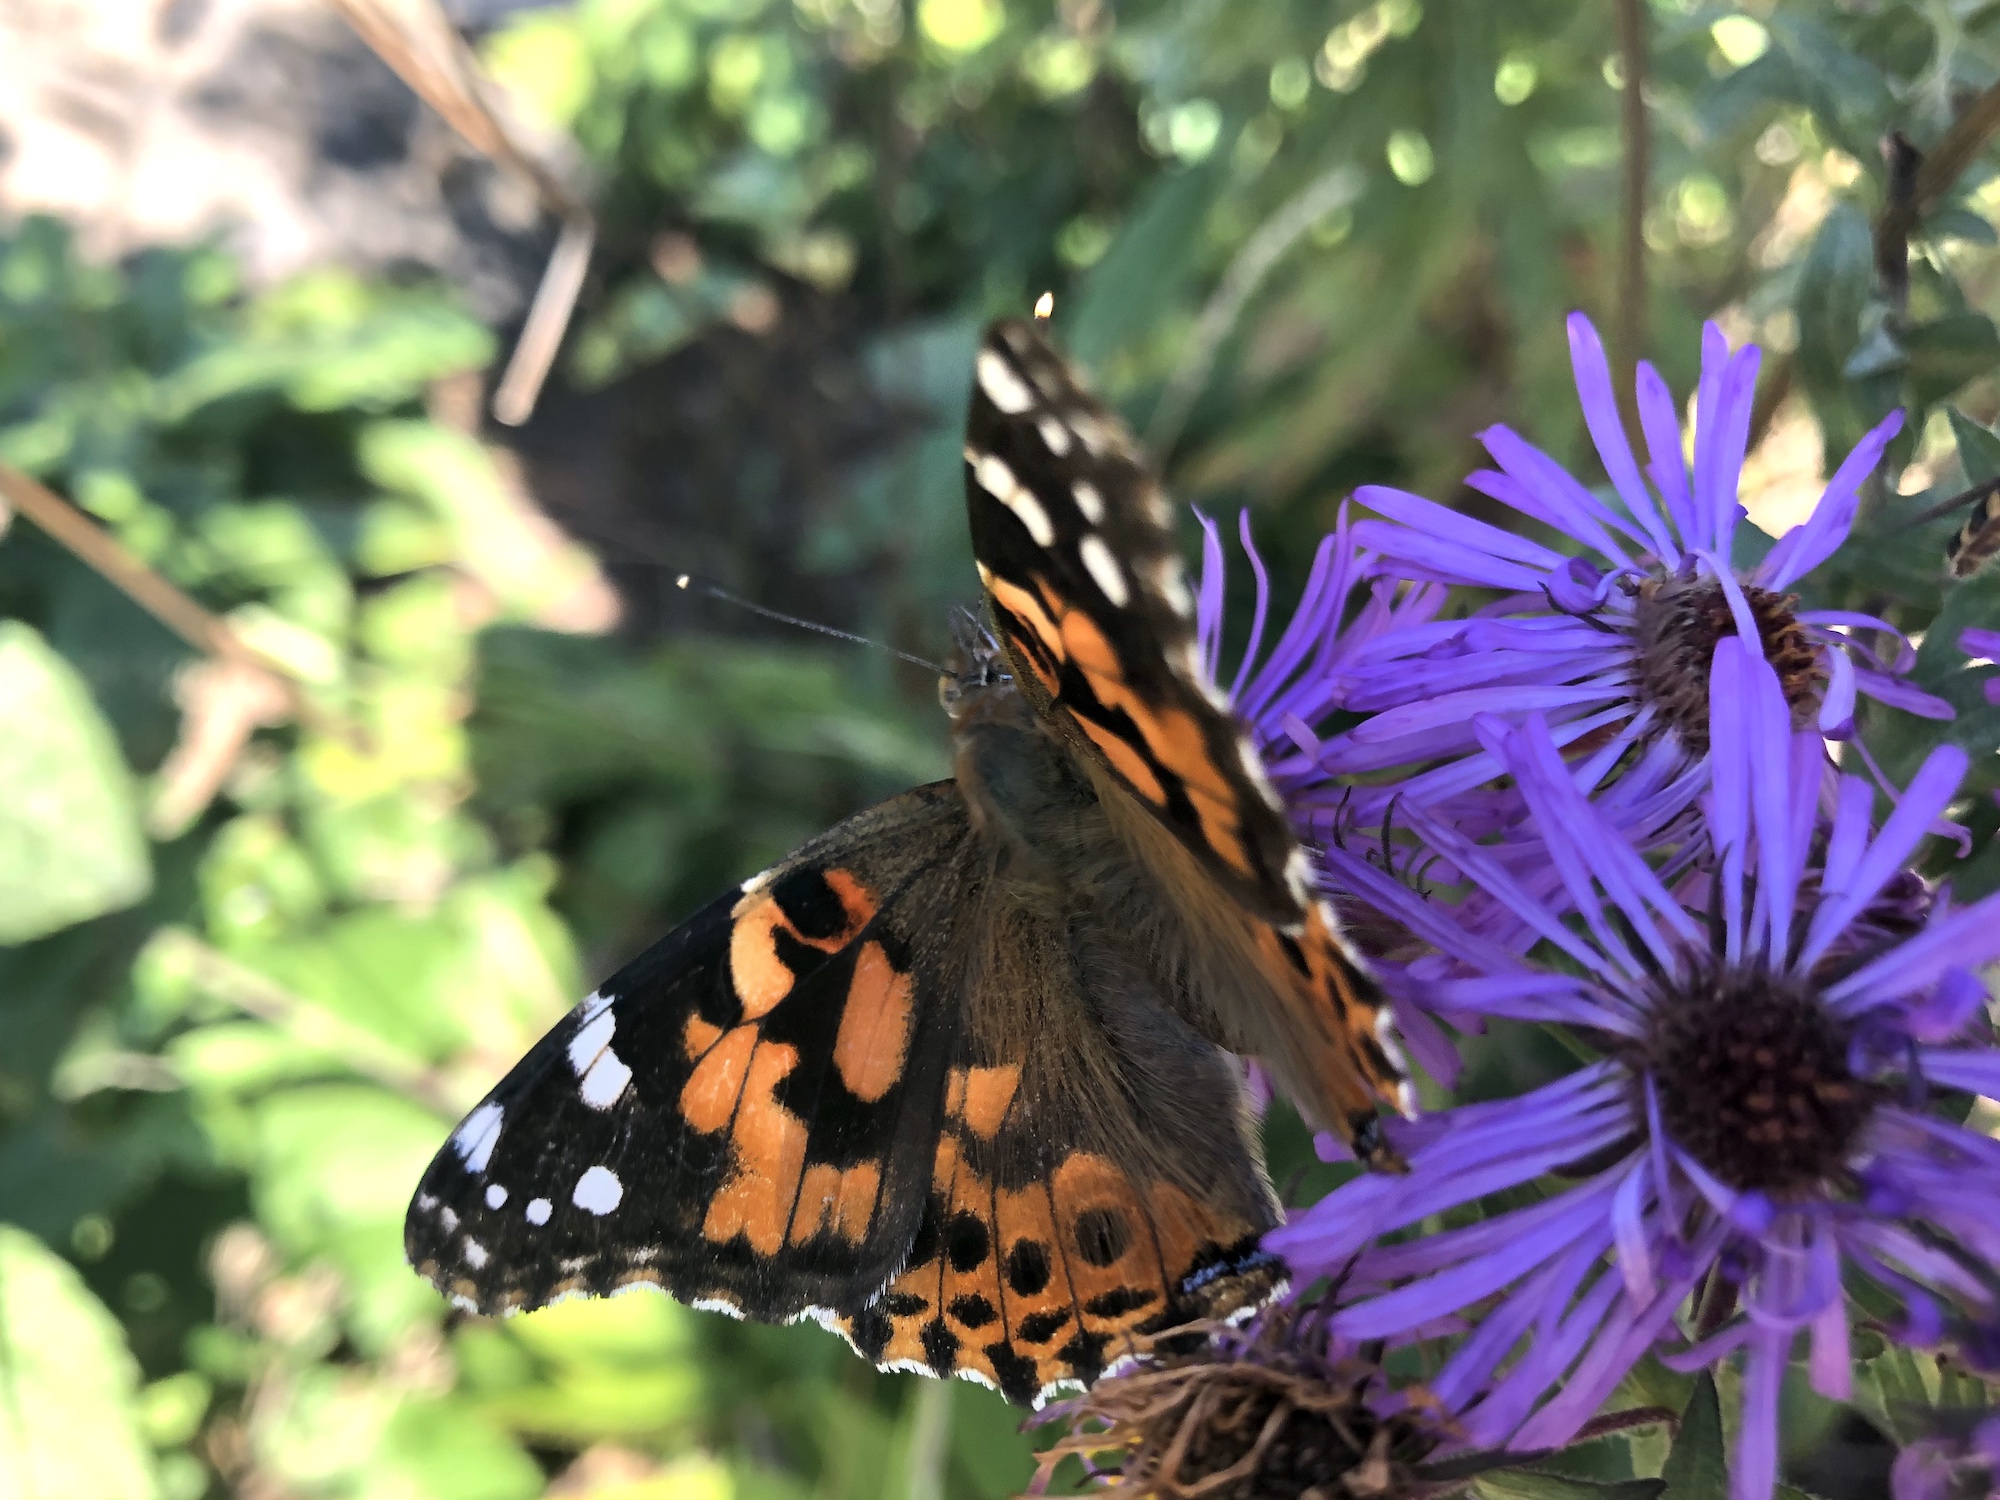 Painted Lady Butterfly on New England Aster in the Thoreau Rain Garden in Madison, Wisconsin on October 8, 2019.